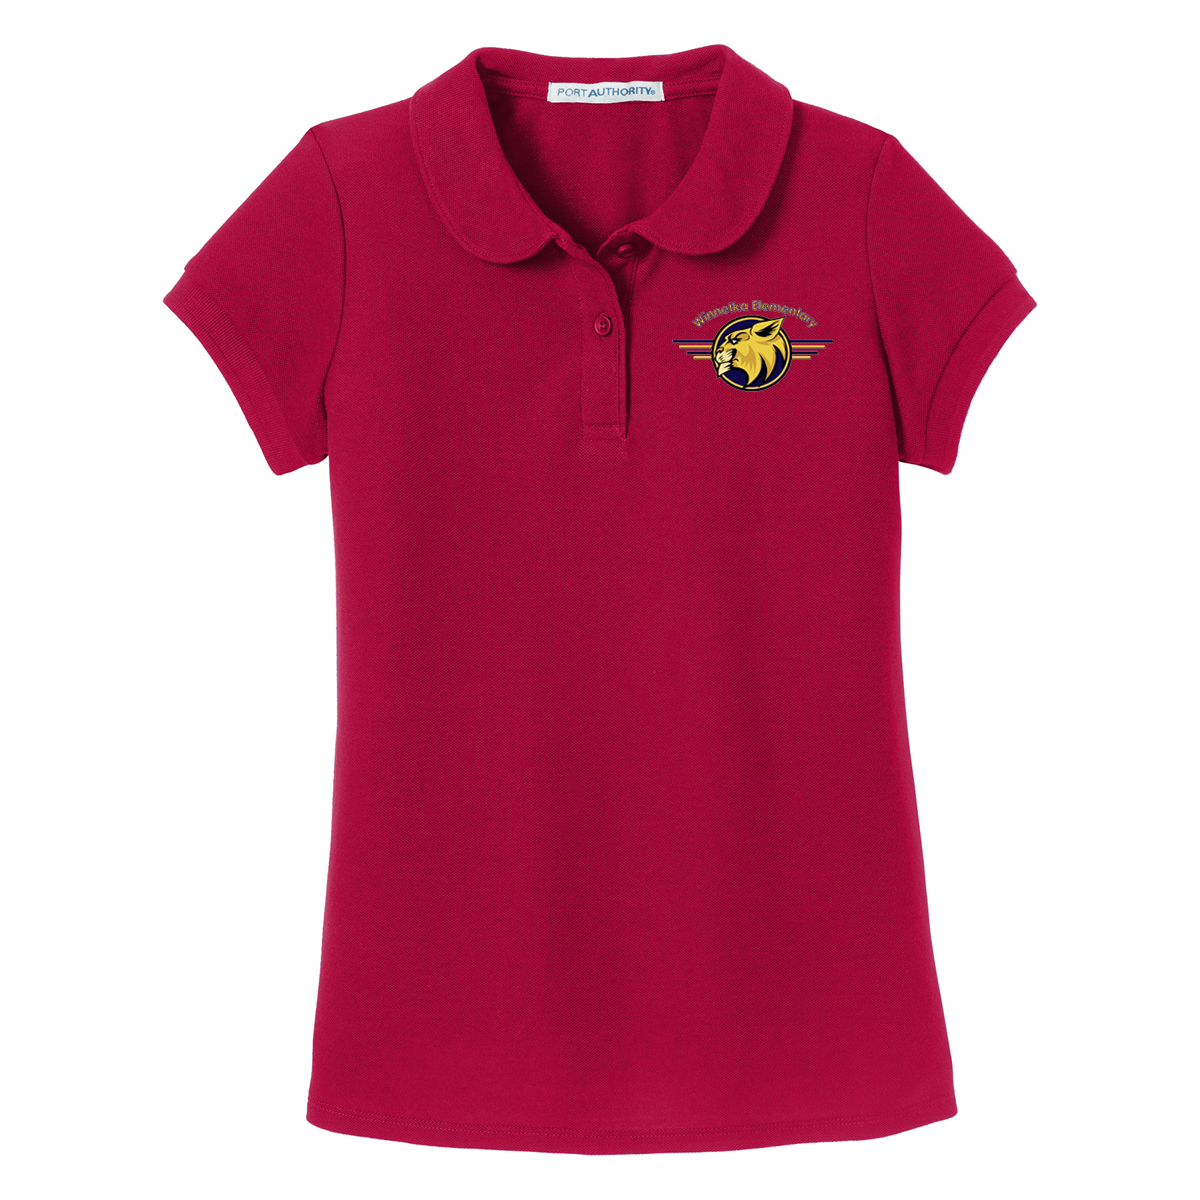 Winnetka - Girls Peter Pan Collar Polo - Red (YG503) - Southern Grace Creations